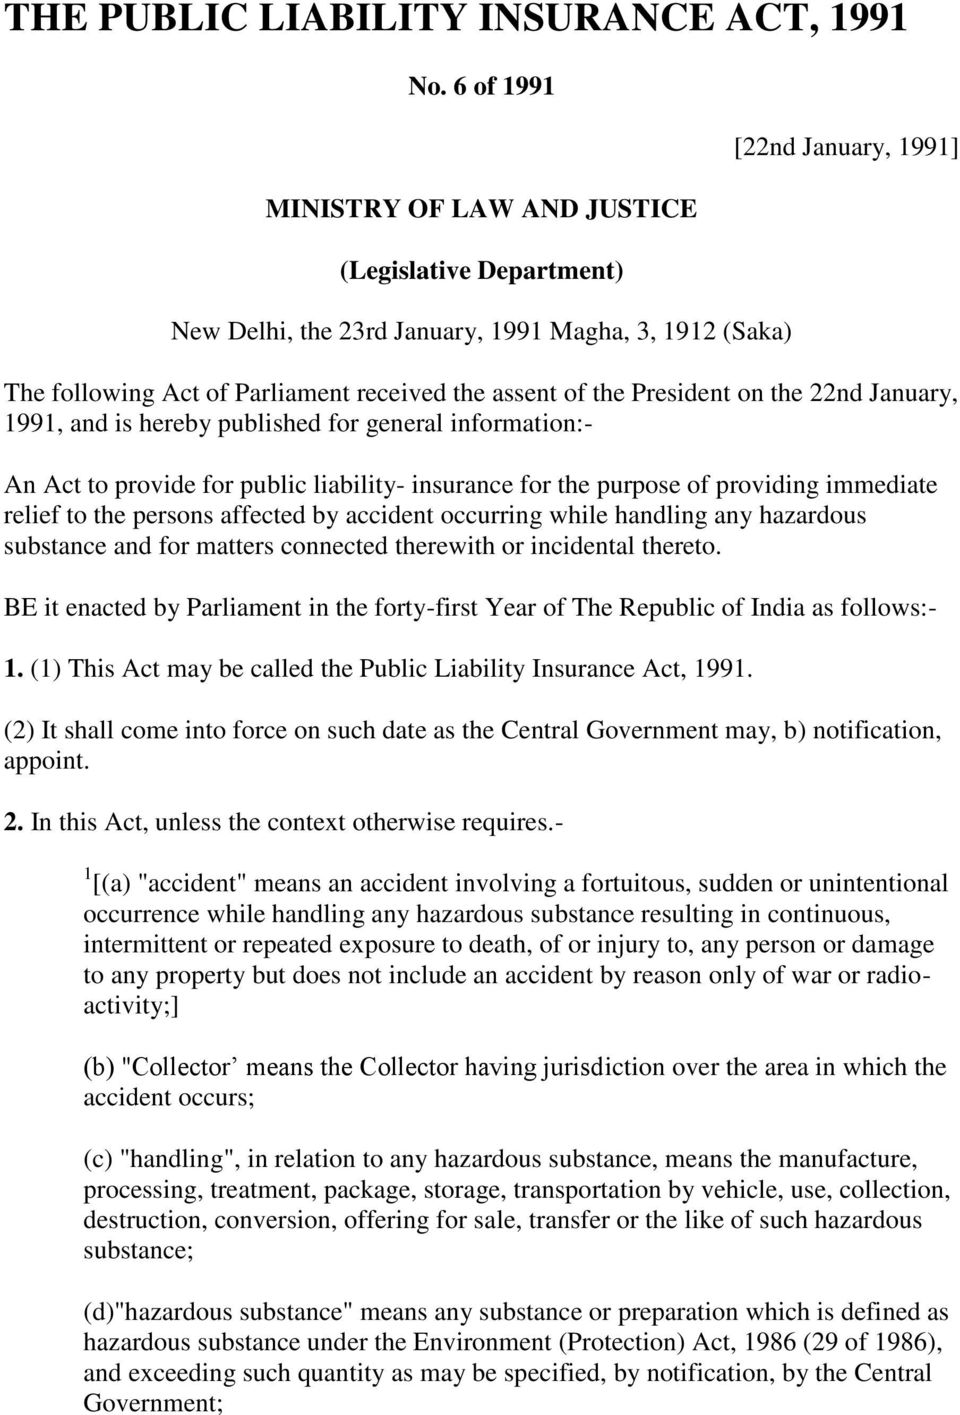 President on the 22nd January, 1991, and is hereby published for general information:- An Act to provide for public liability- insurance for the purpose of providing immediate relief to the persons